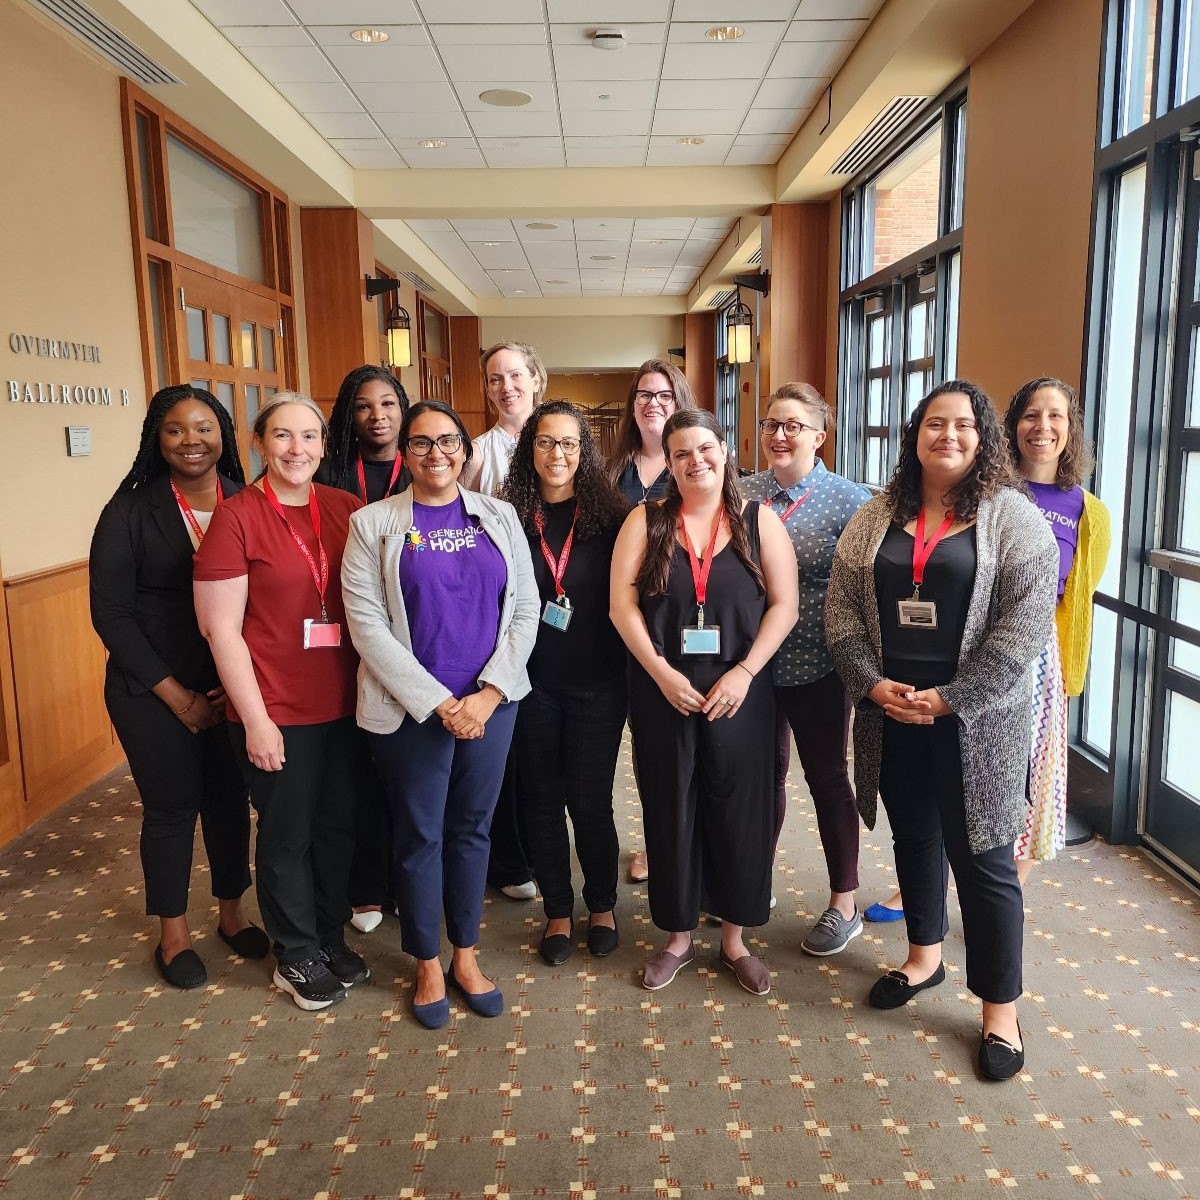 We’re still buzzing from having such an amazing time at the National Student Parent Support Symposium last week! We got to share lessons we’ve learned through our work with #StudentParents and connect with student-parent champions from across the country. Thank you, #2023SPSS!